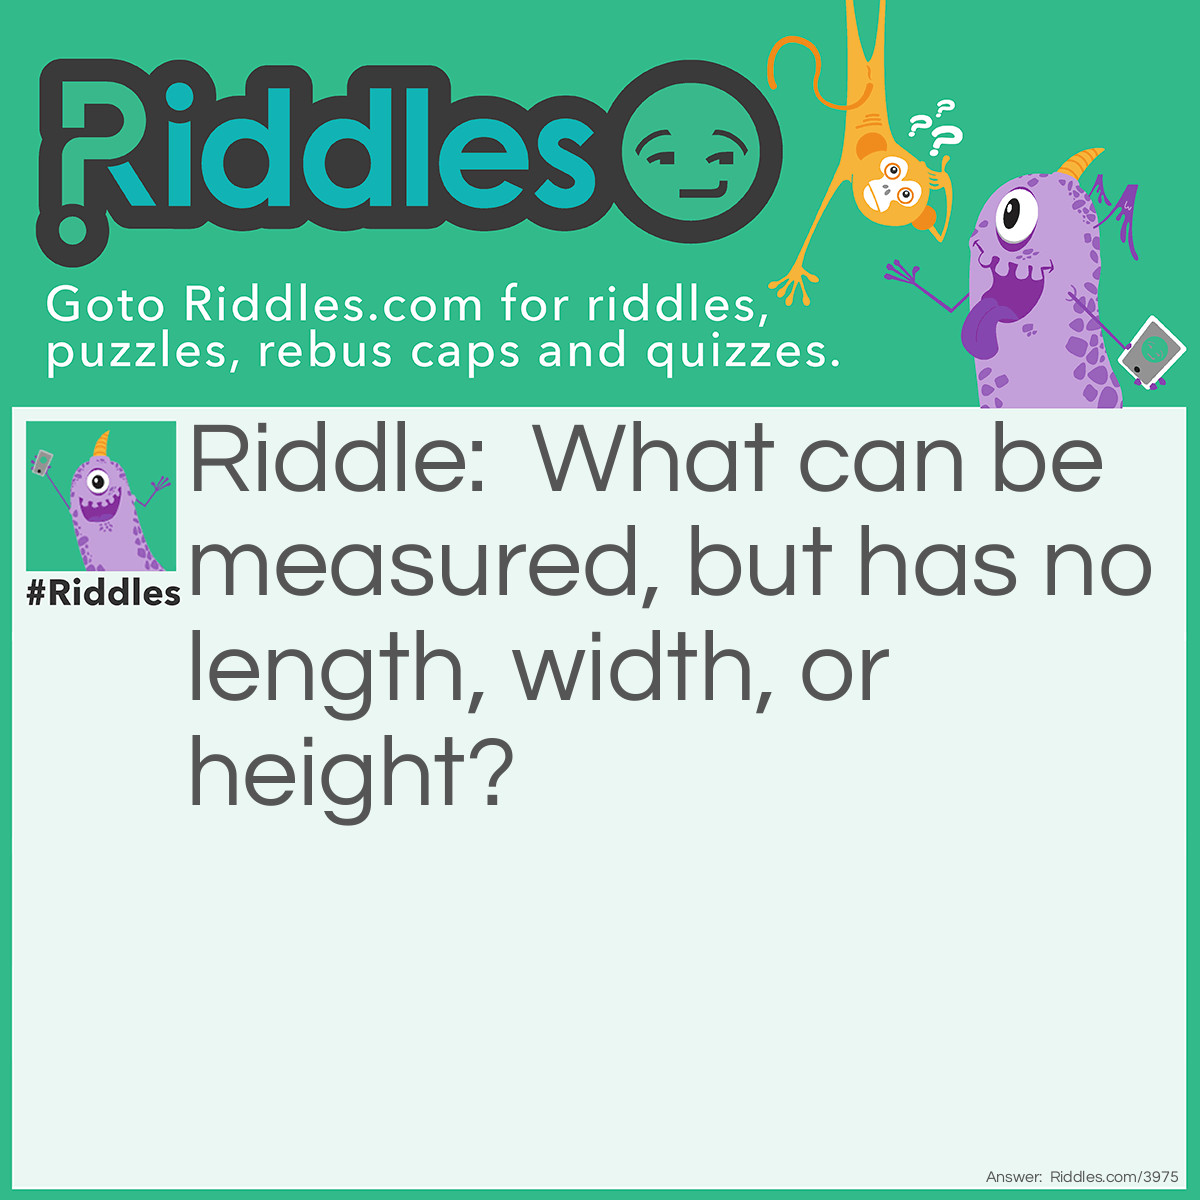 Riddle: What can be measured, but has no length, width, or height? Answer: The Temperature.